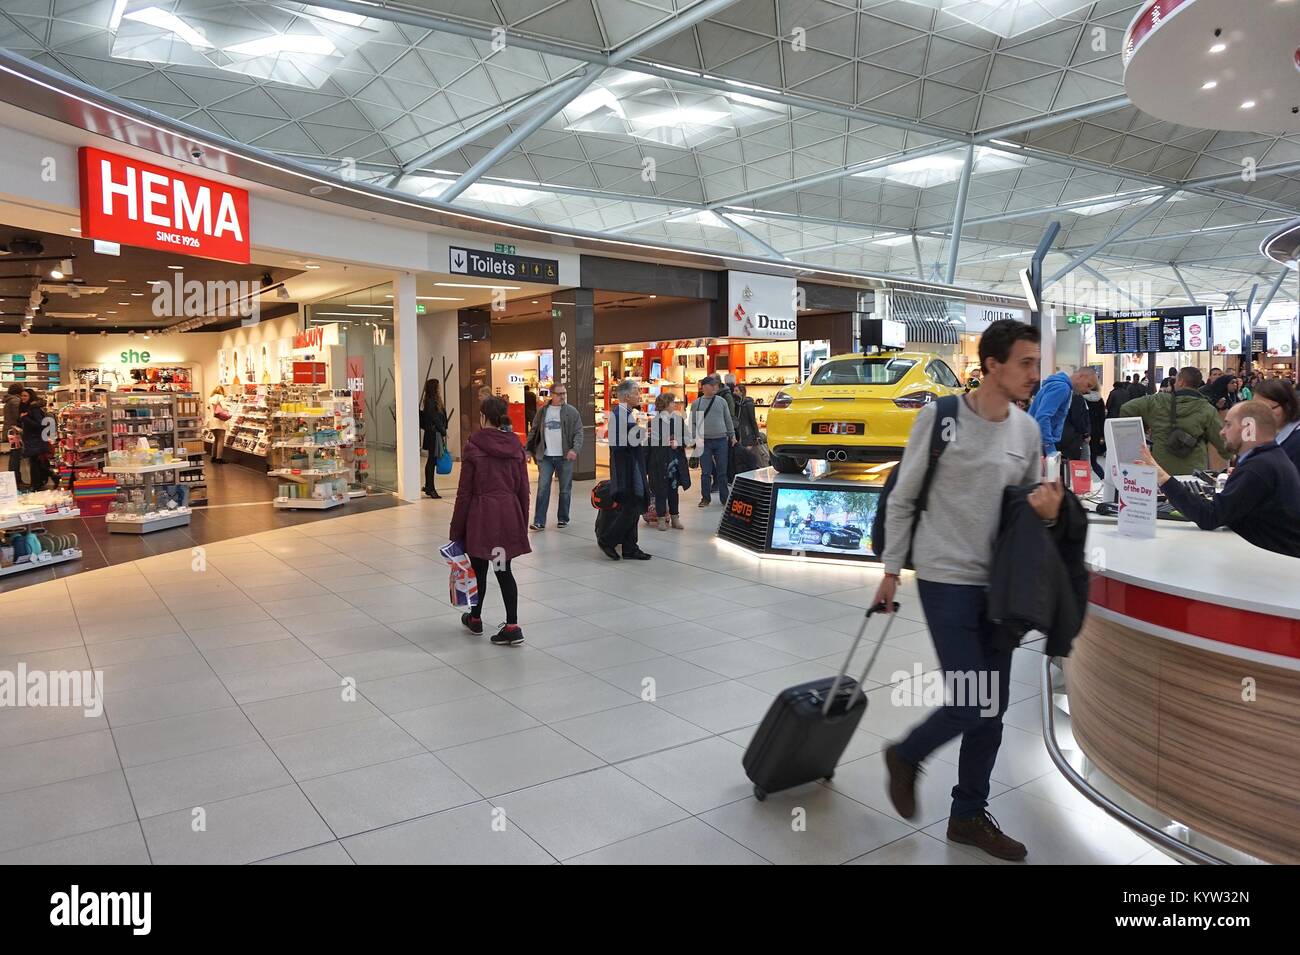 LONDON, UK - APRIL 24, 2016: People visit duty free shops in London Stansted Airport, UK. With 22.5 million passengers in 2015 Stansted was the 4th bu Stock Photo